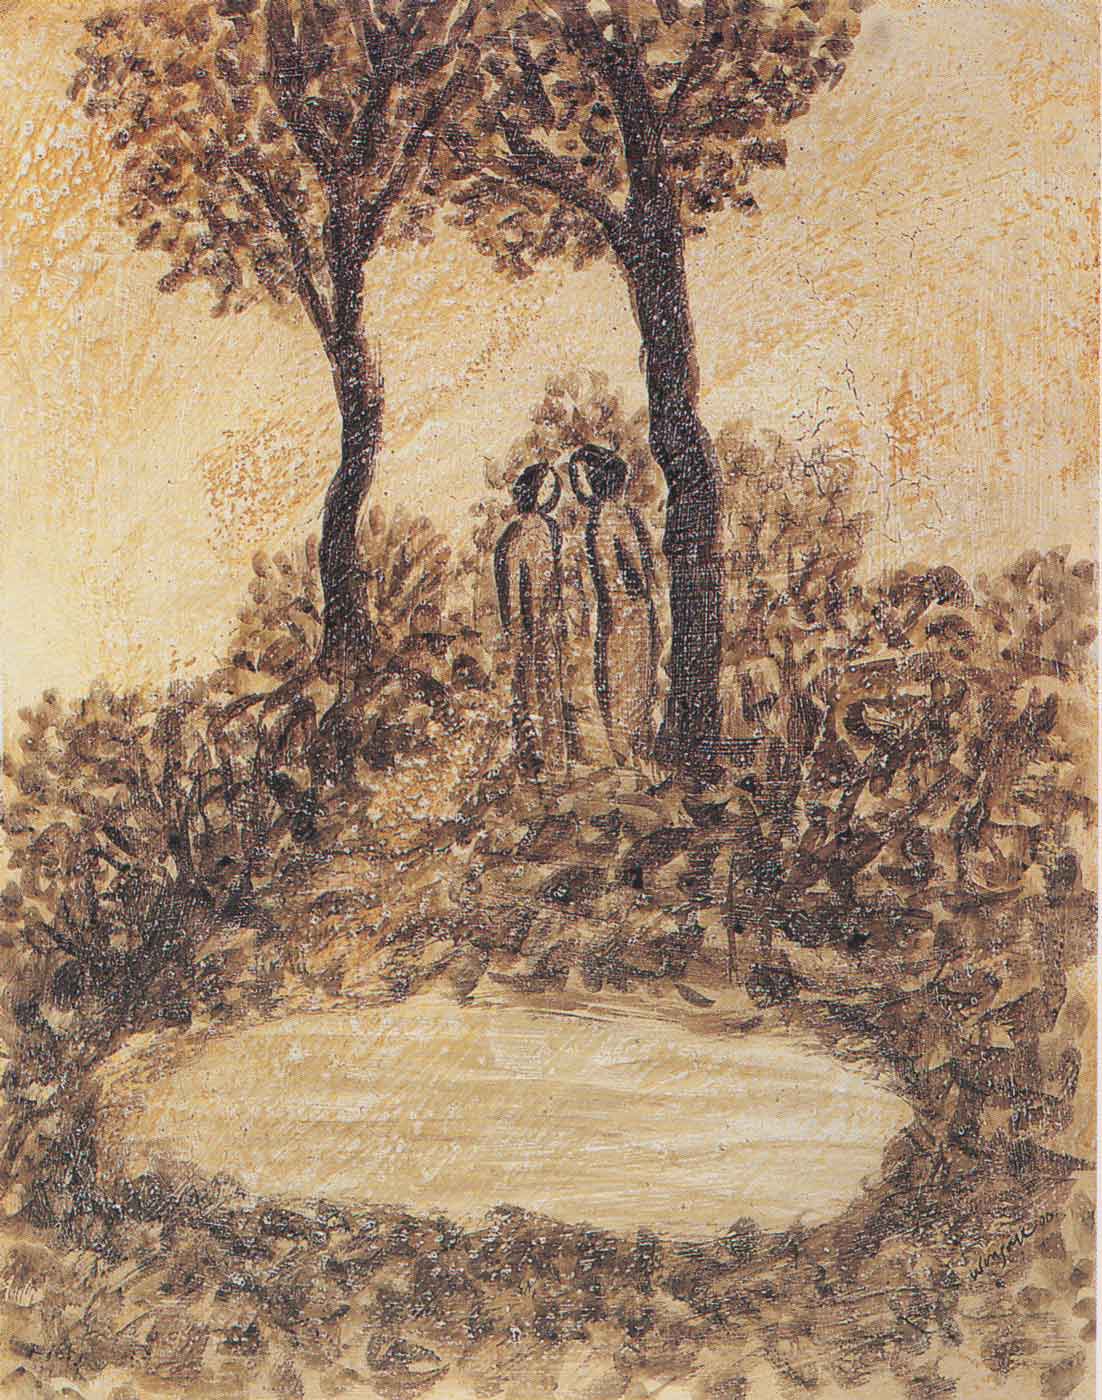 <em>Two in the Forest</em>, 1999. Oil on mixed media, 24 x 19 in. (62 x 49 cm)